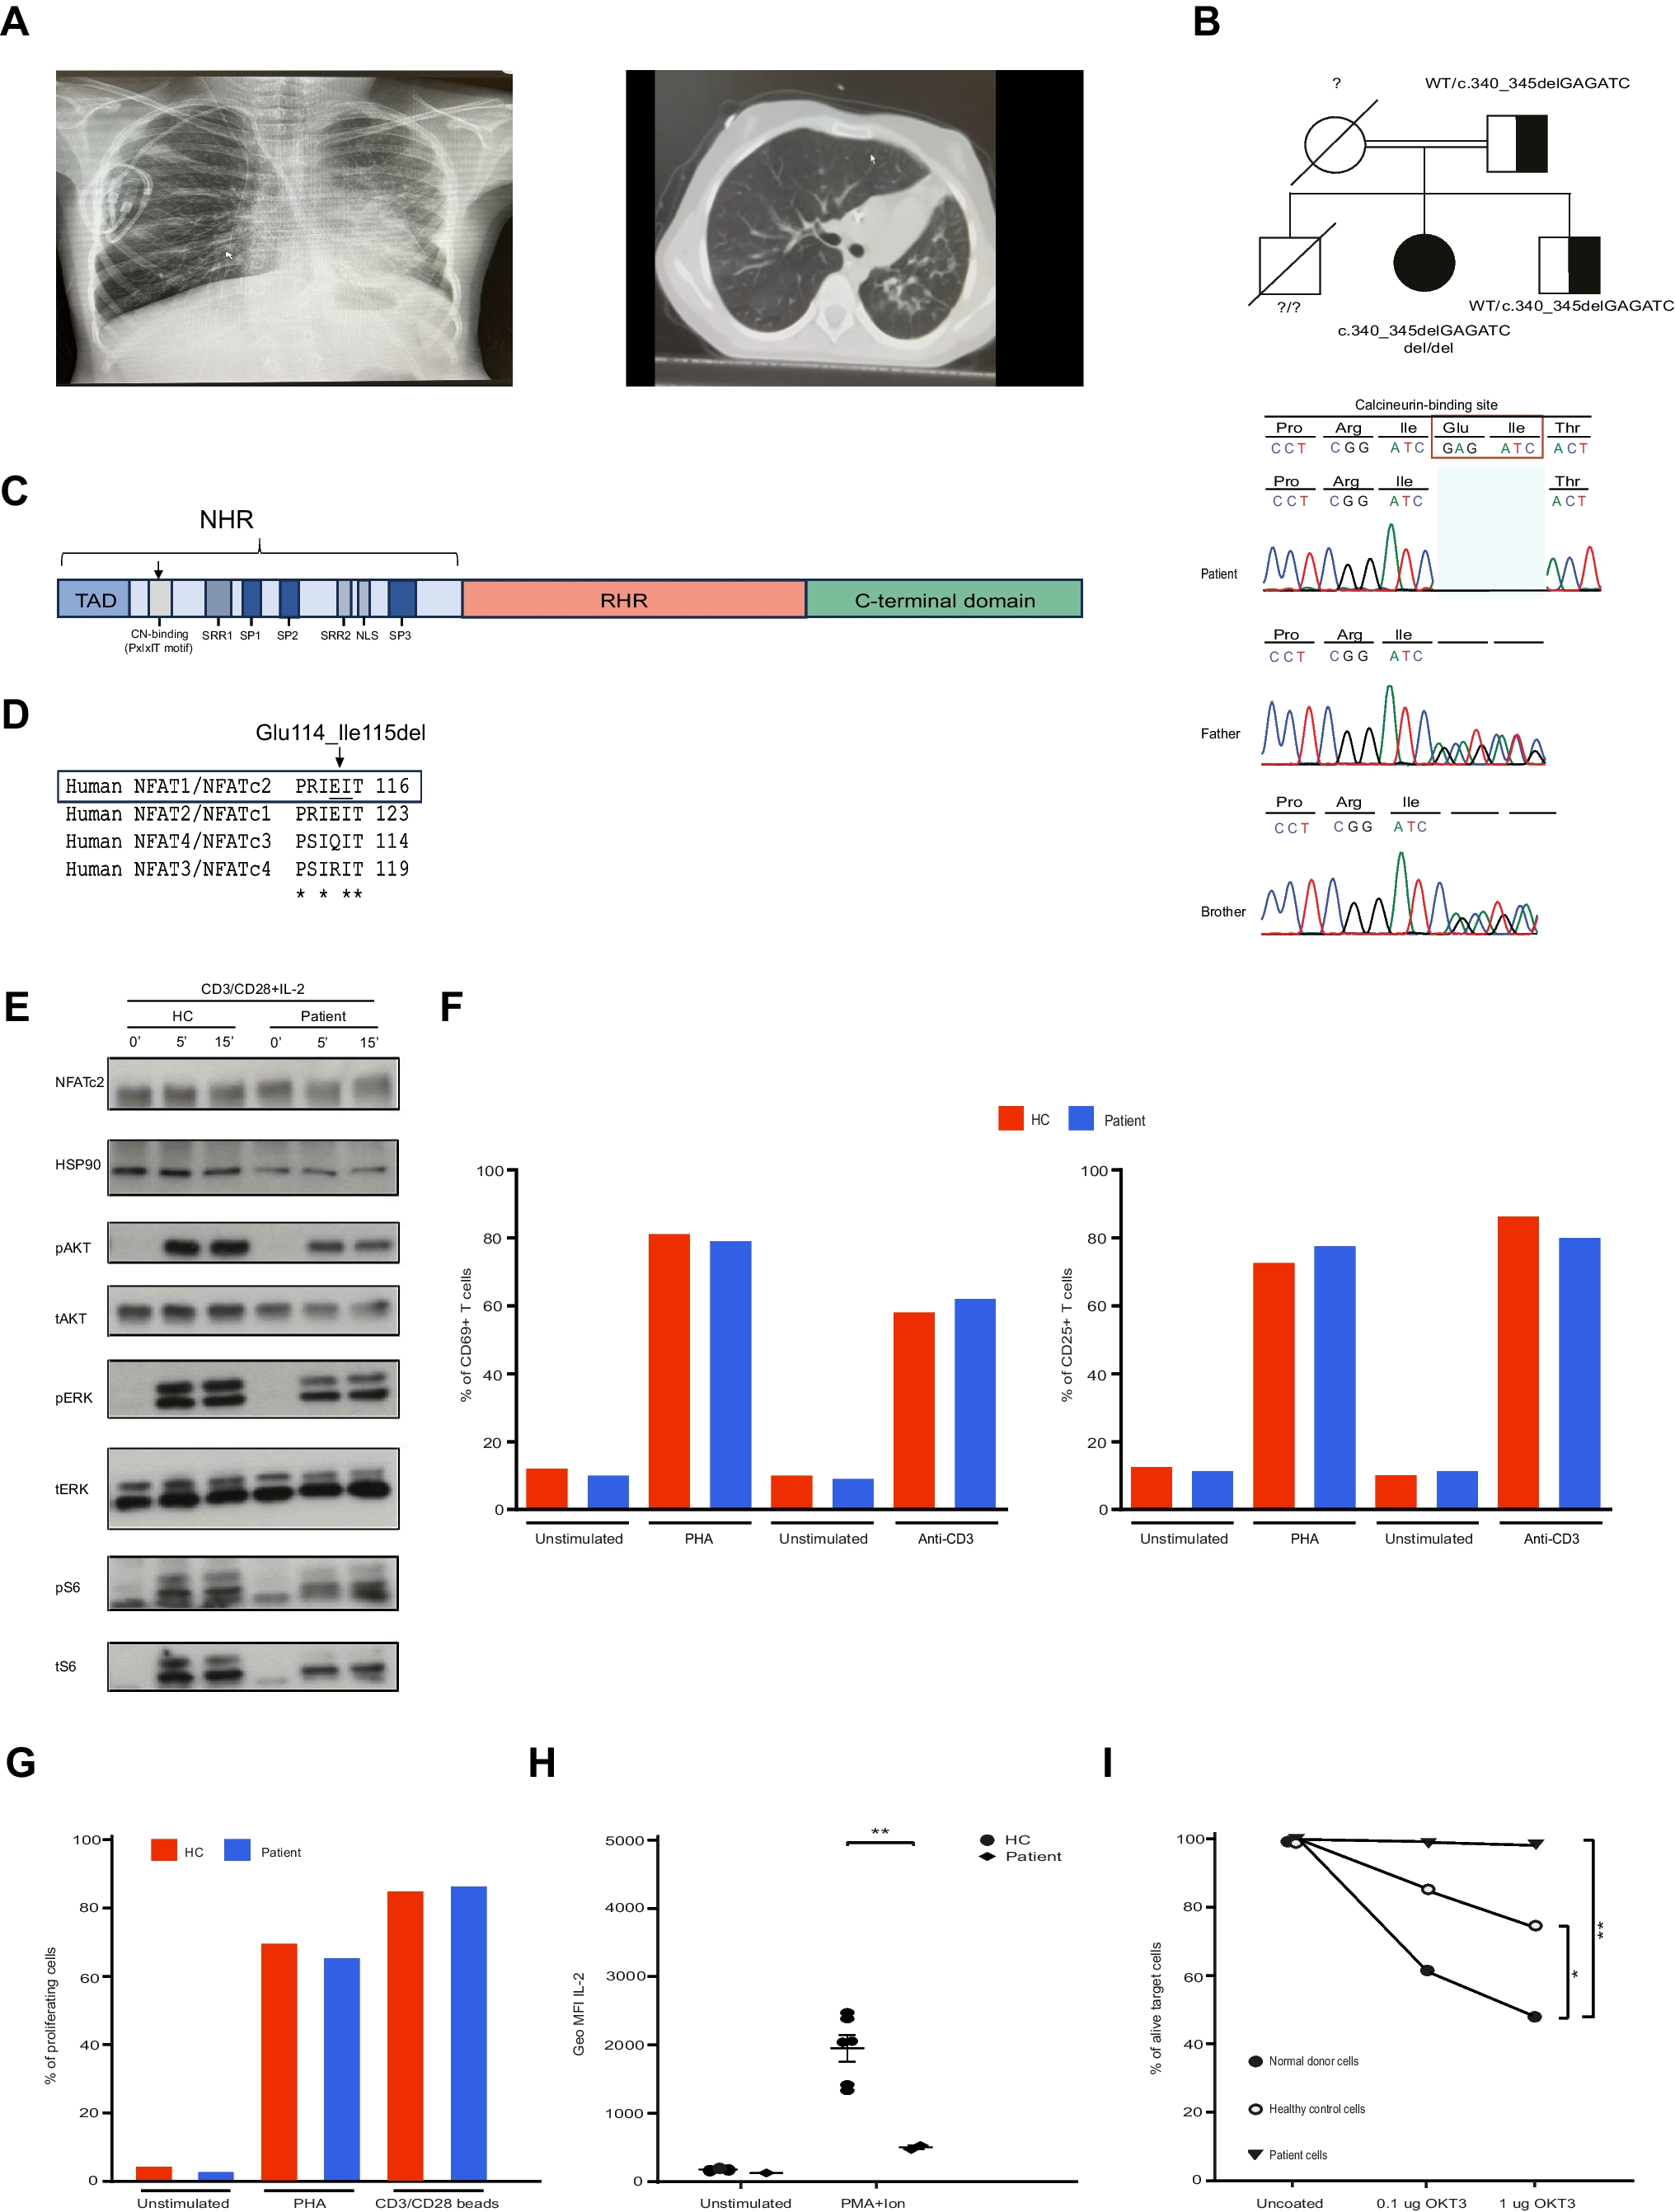 A Novel Homozygous Six Base Pair Deletion Found in the NFATC2 Gene in a Patient with EBV-Associated Lymphoproliferation